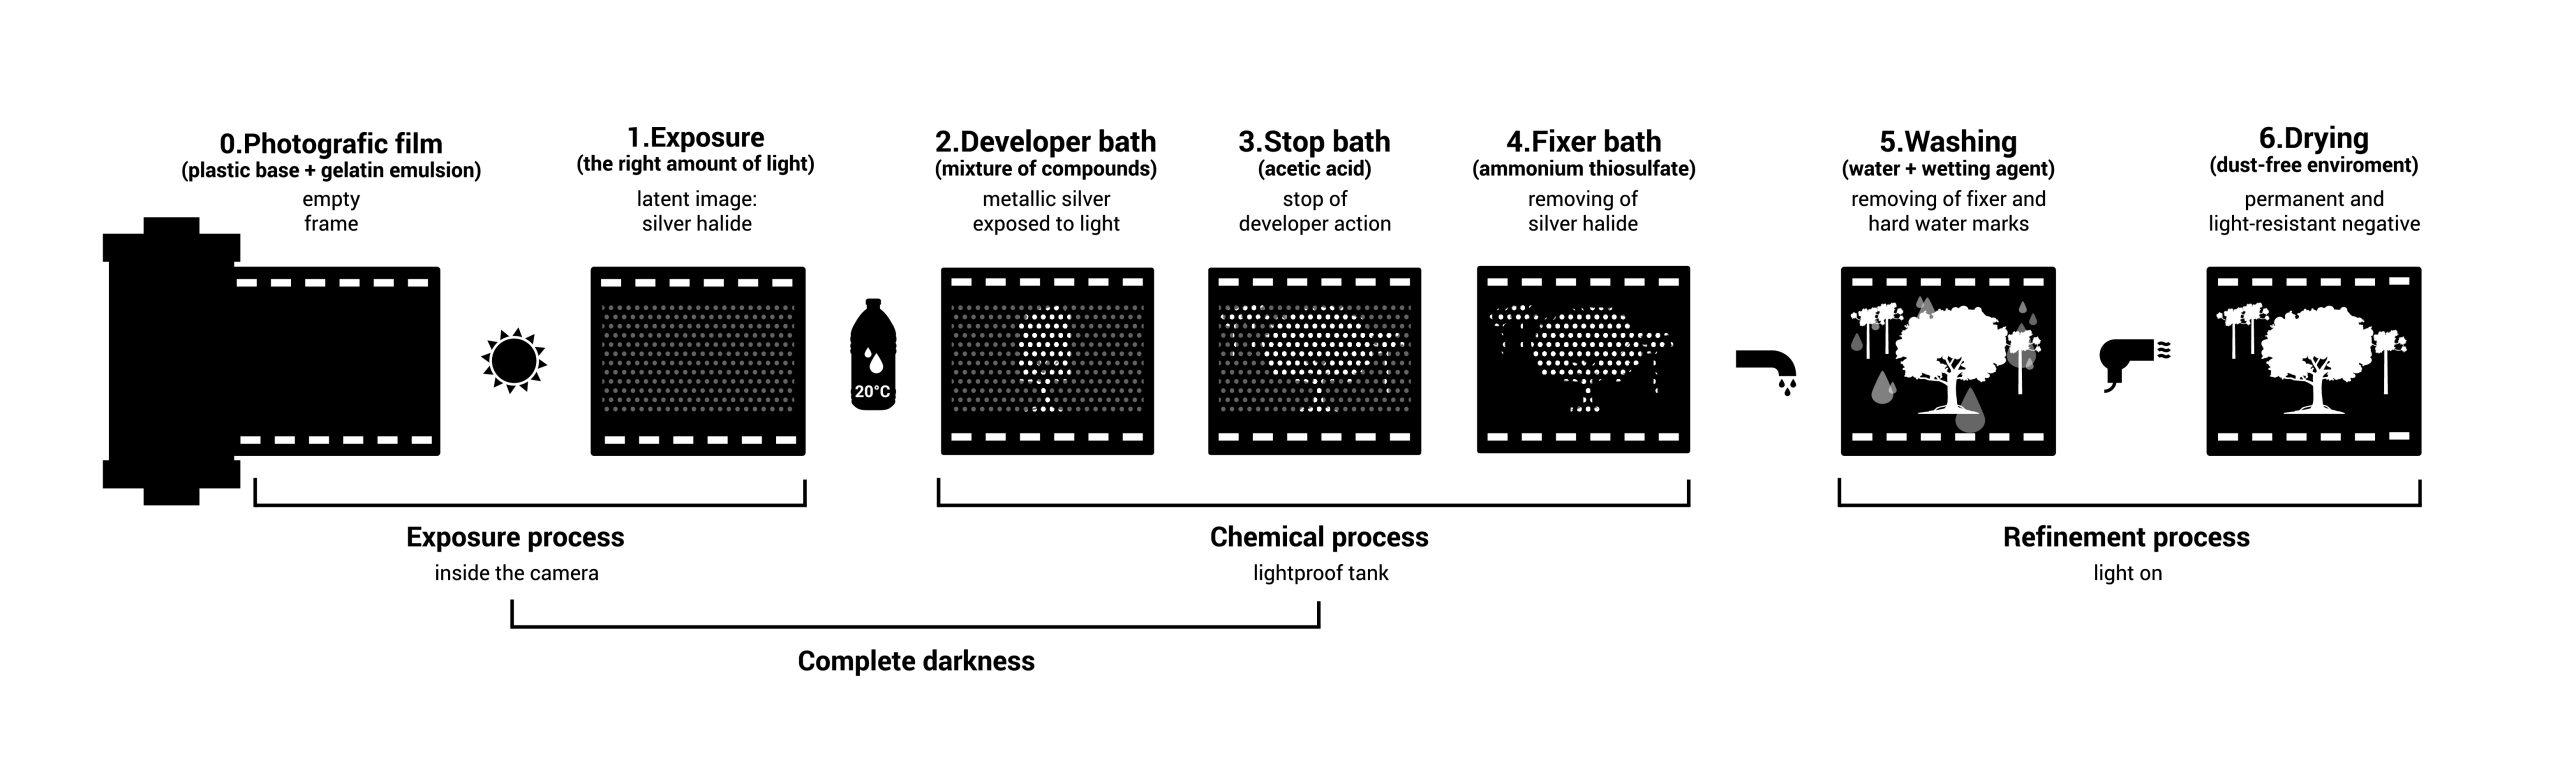 this chart explains the process of making a print from left to right 0. photographic film 1.exposure, 2. developer, 3. stop bath, 4. fixer, 5. washing 6.drying